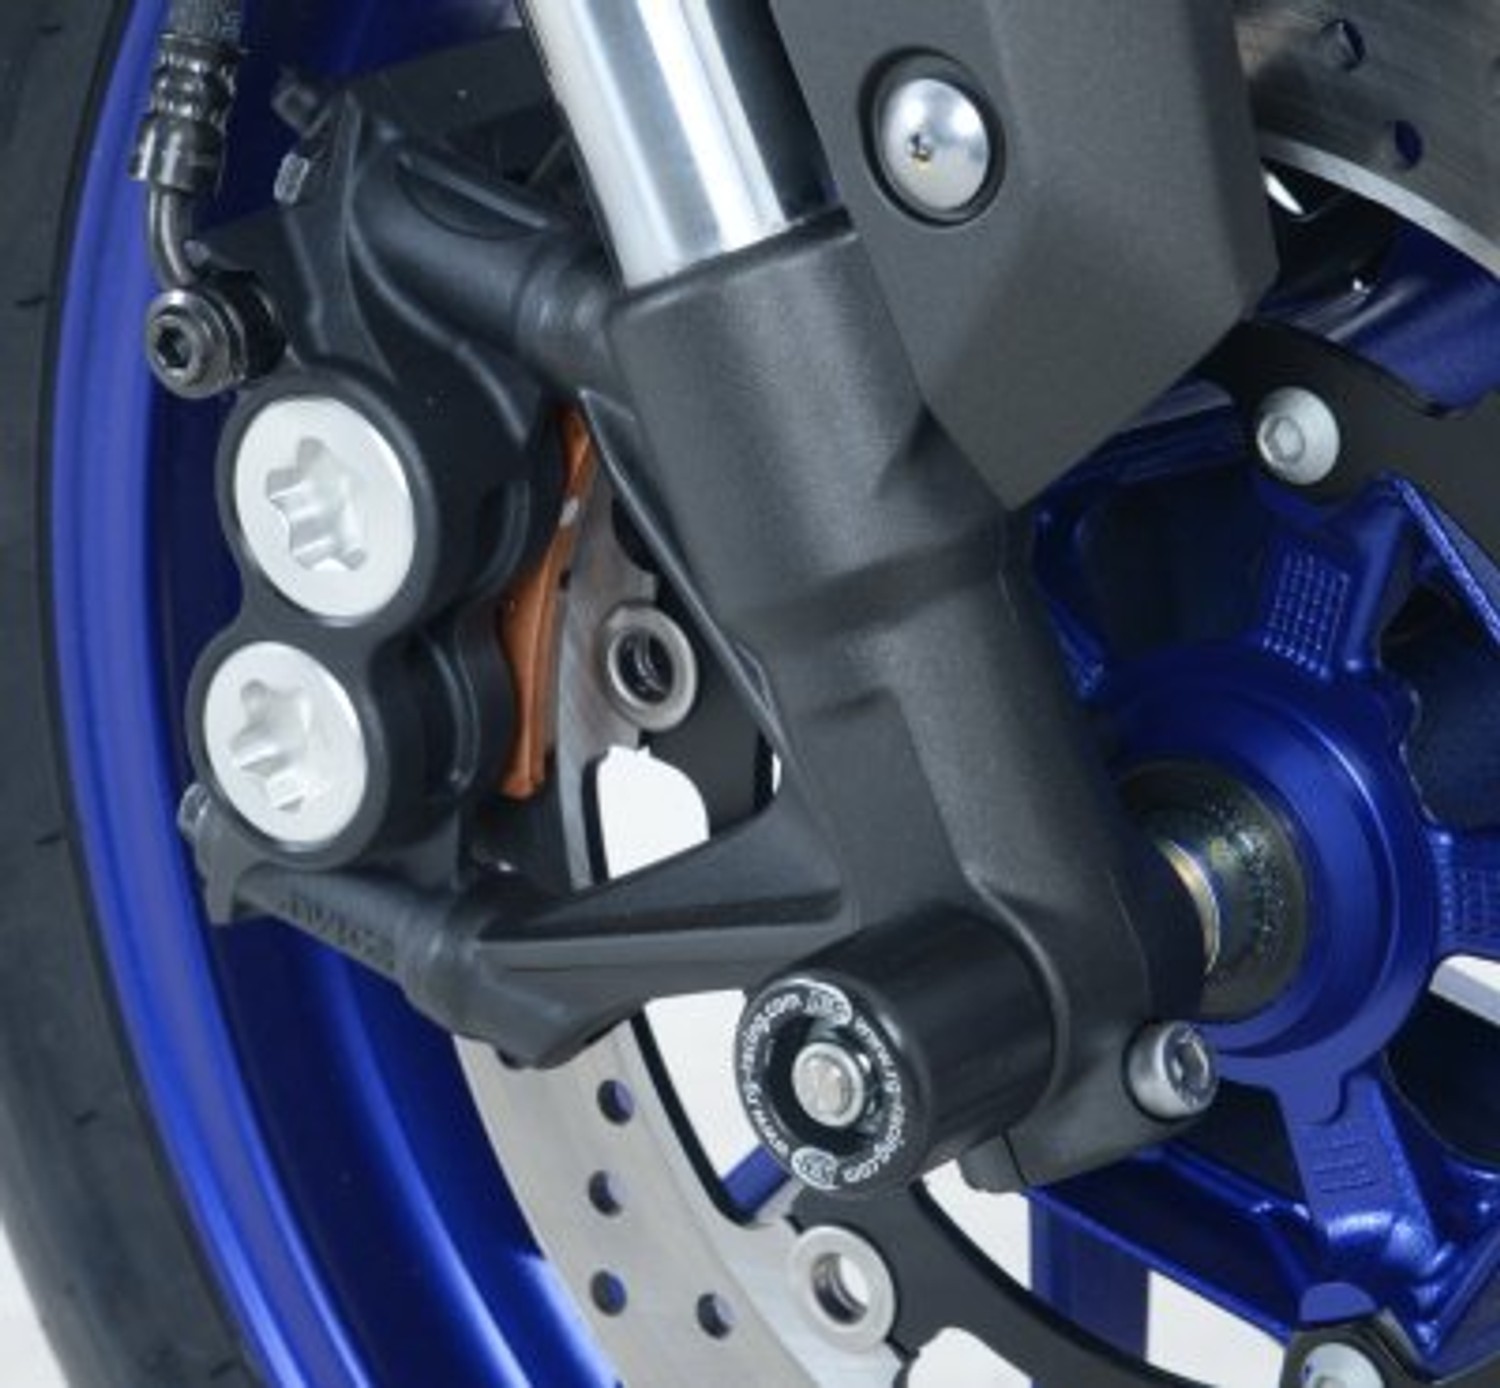 R&G Racing Fork Protectors to fit Yamaha Super Tenere 1200 